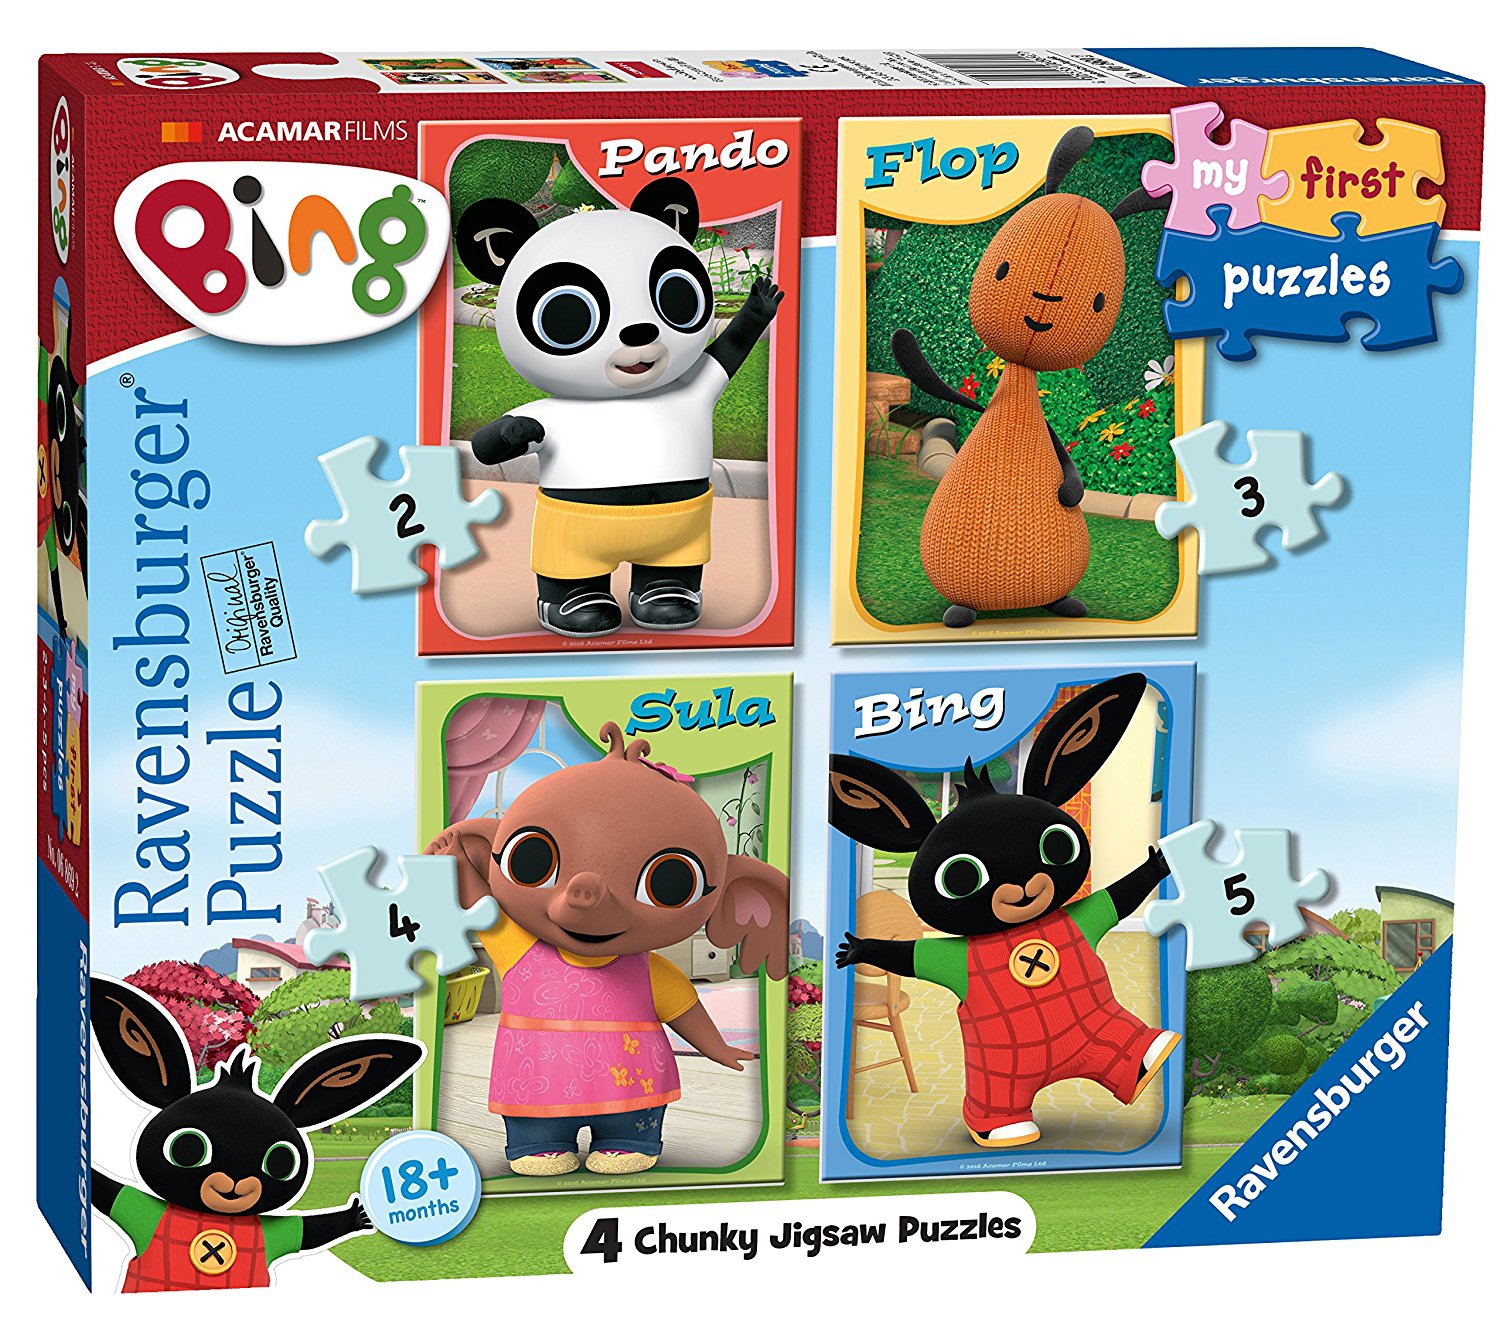 Bing Bunny 'My First' 2 3 4 5 Piece Jigsaw Puzzle Game